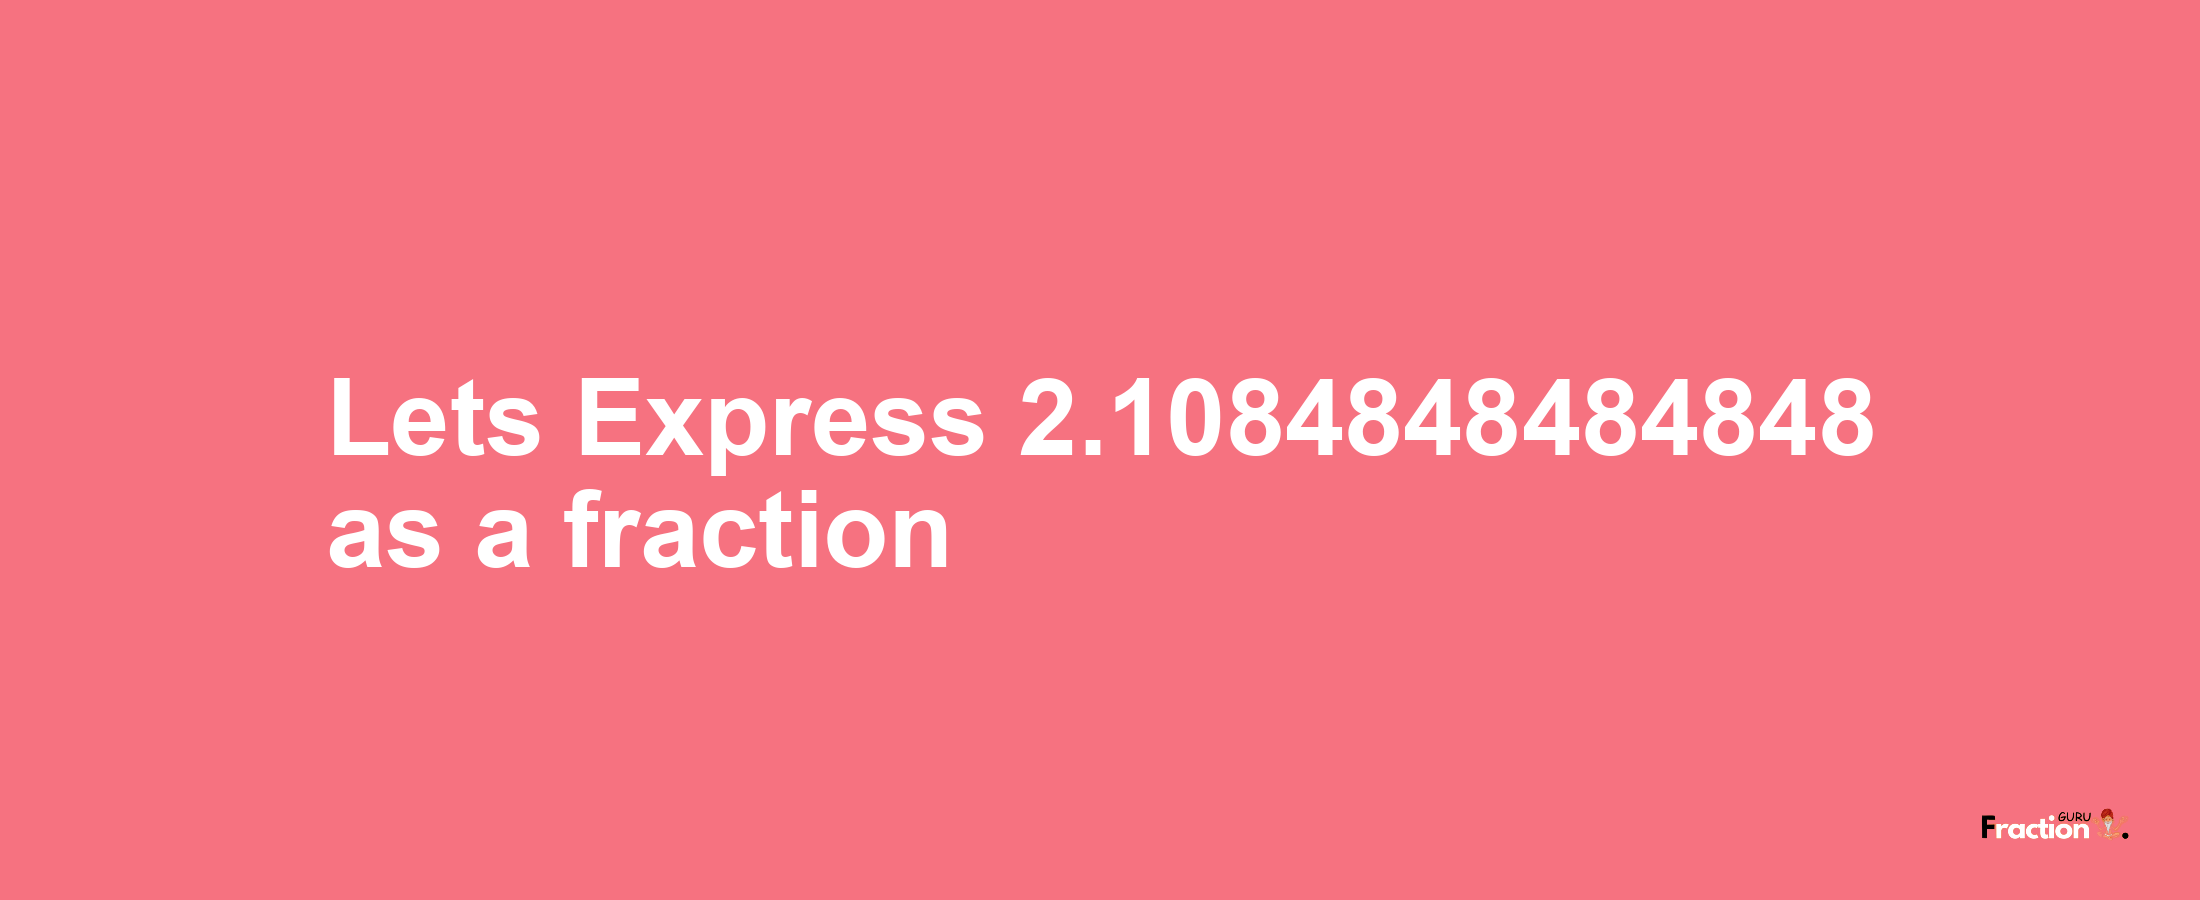 Lets Express 2.1084848484848 as afraction